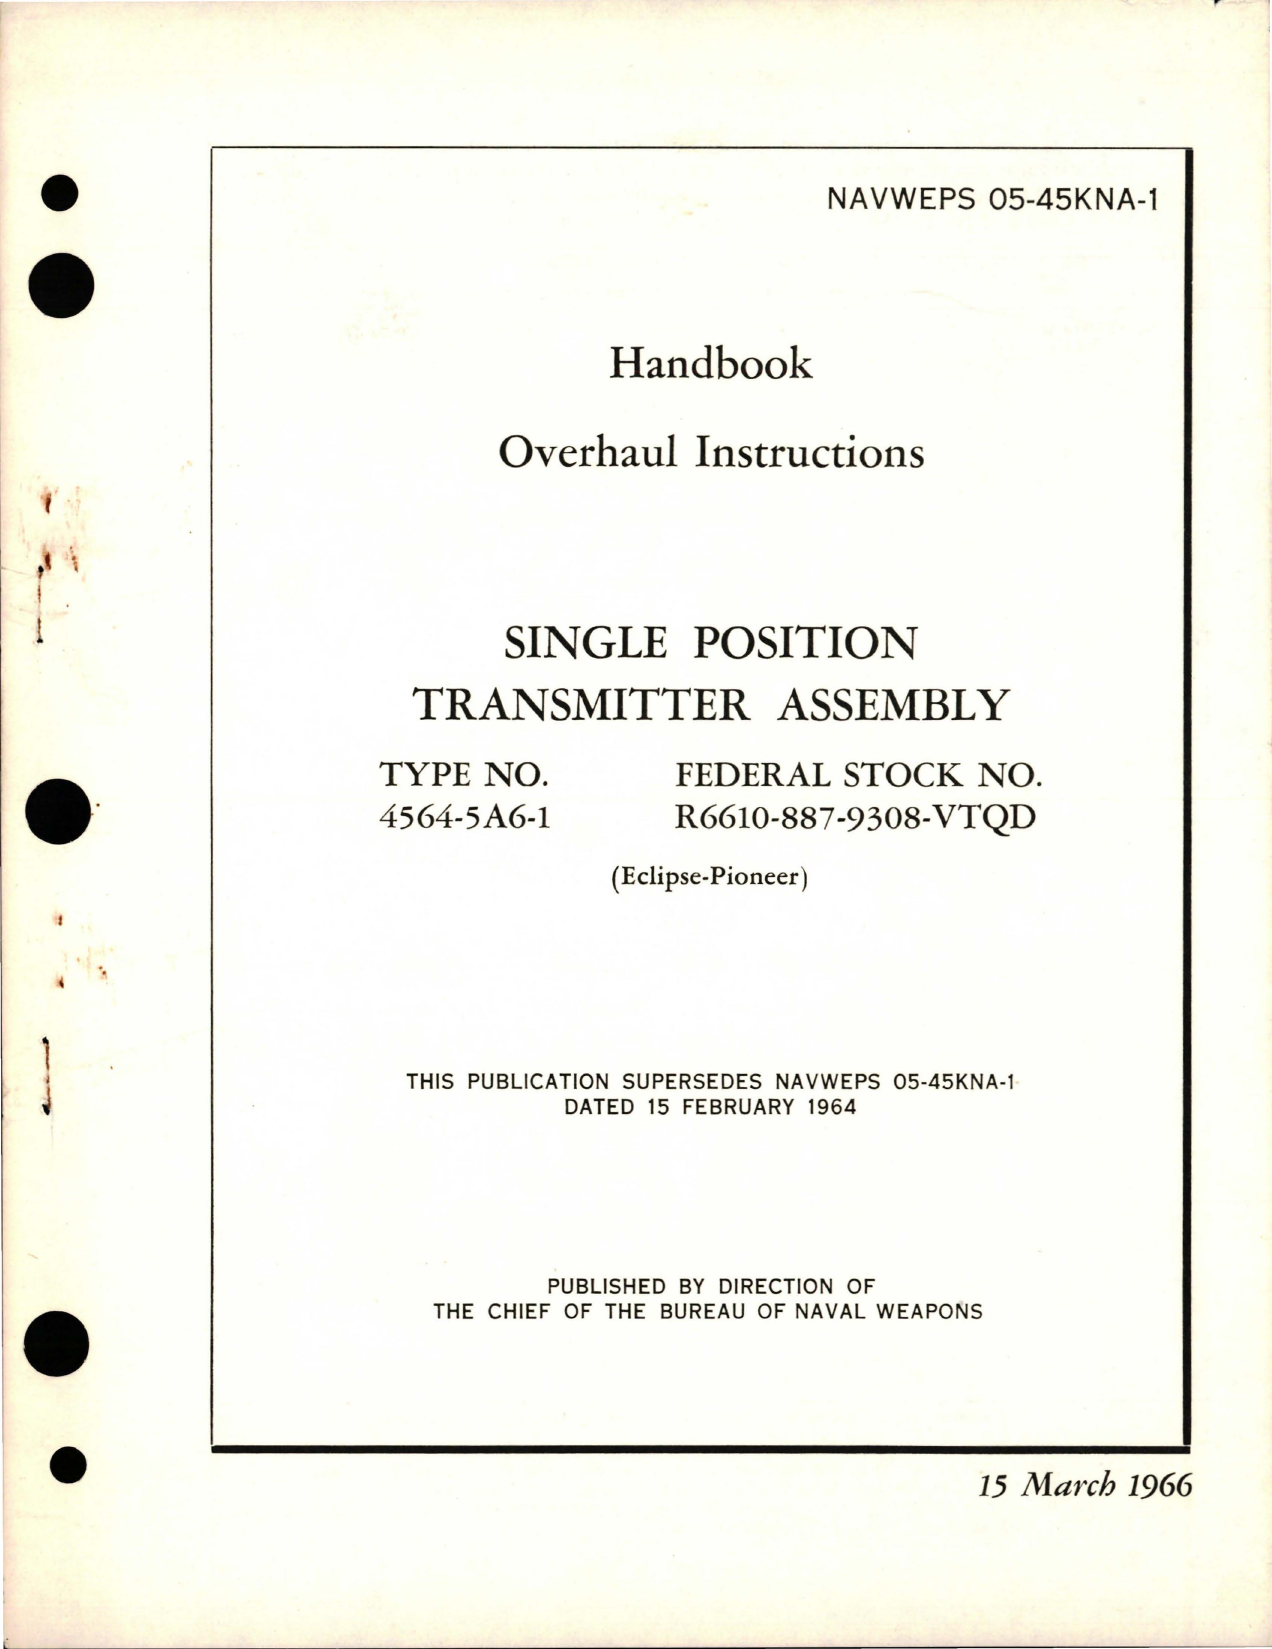 Sample page 1 from AirCorps Library document: Overhaul Instructions for Single Position Transmitter Assembly - Type 4564-5A6-1